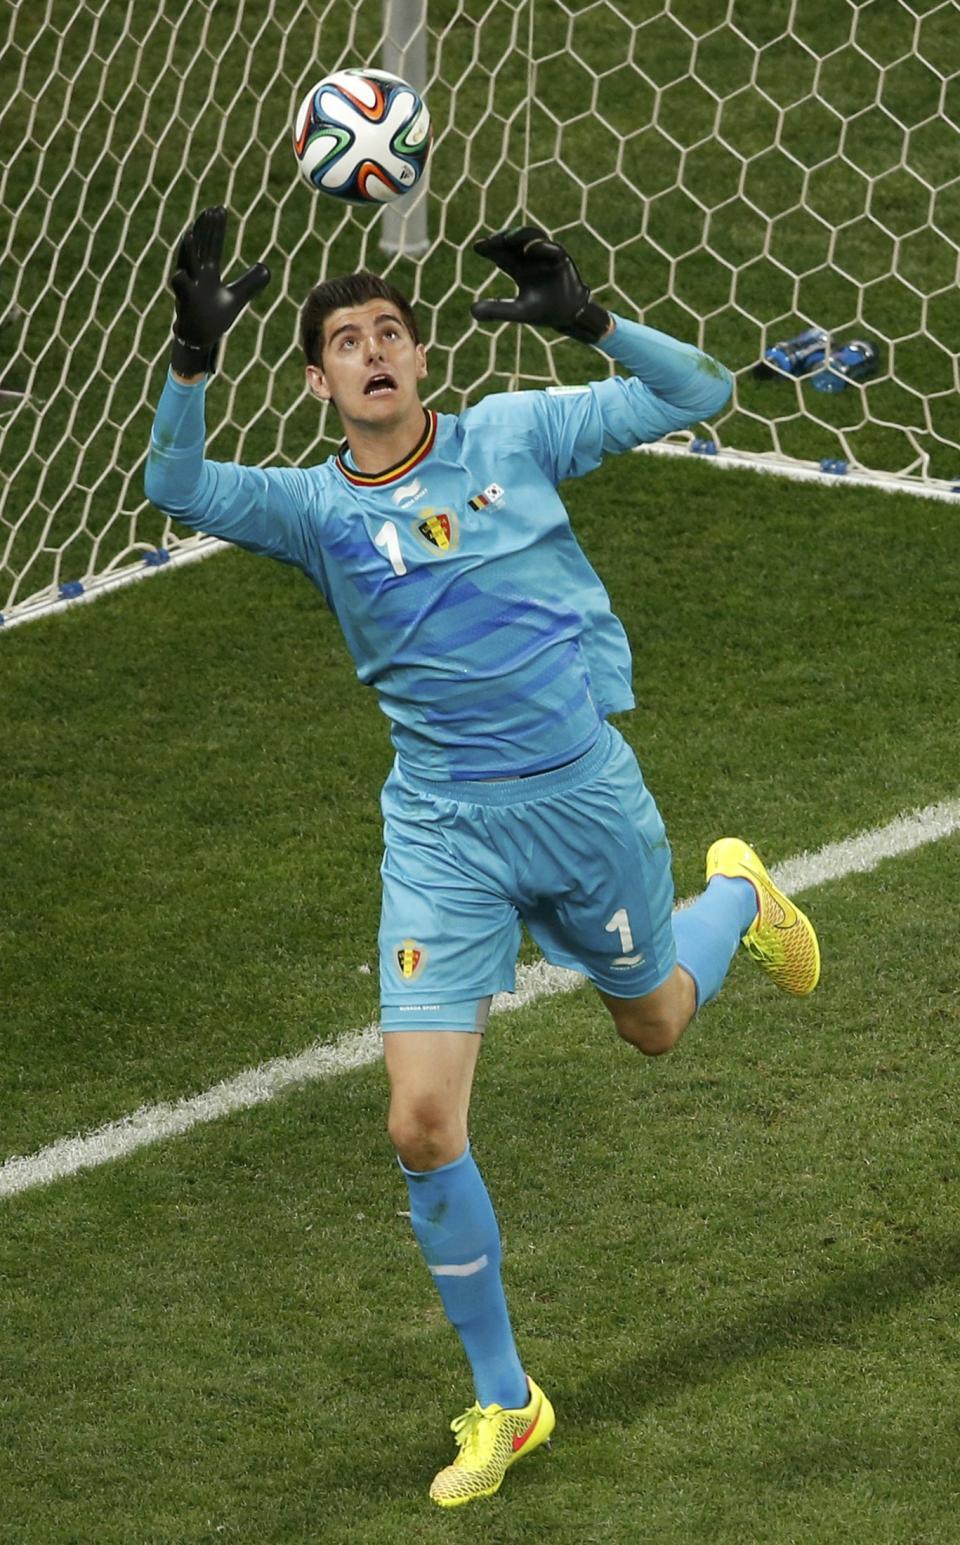 Belgium's goalkeeper Thibaut Courtois makes a save during their 2014 World Cup Group H soccer match against South Korea at the Corinthians arena in Sao Paulo June 26, 2014. REUTERS/Paulo Whitaker (BRAZIL - Tags: SOCCER SPORT WORLD CUP)